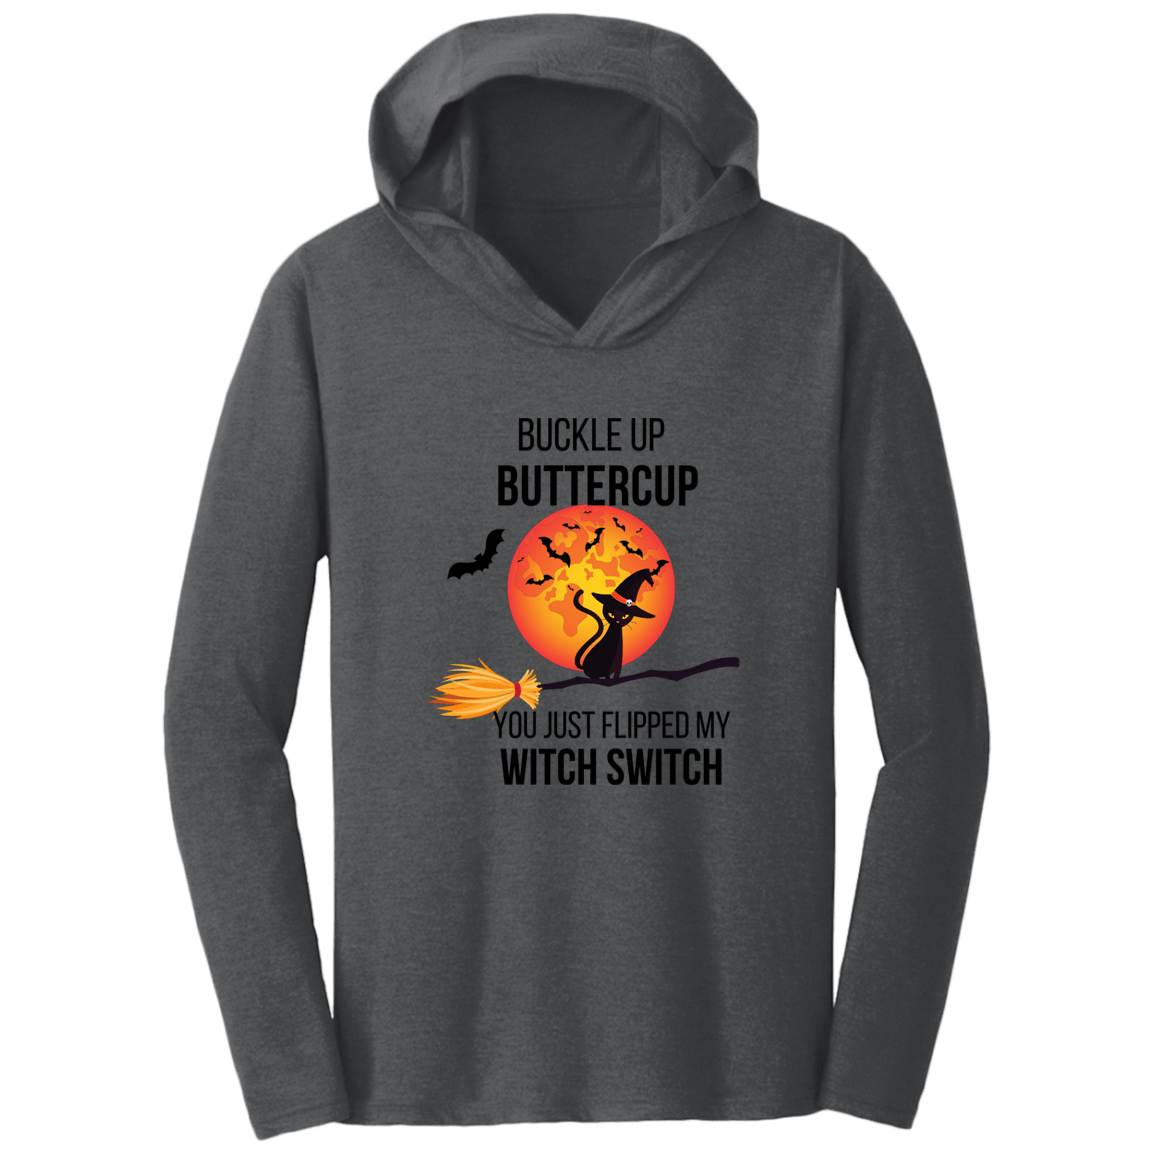 Buckle Up Buttercup Soft Hoodie